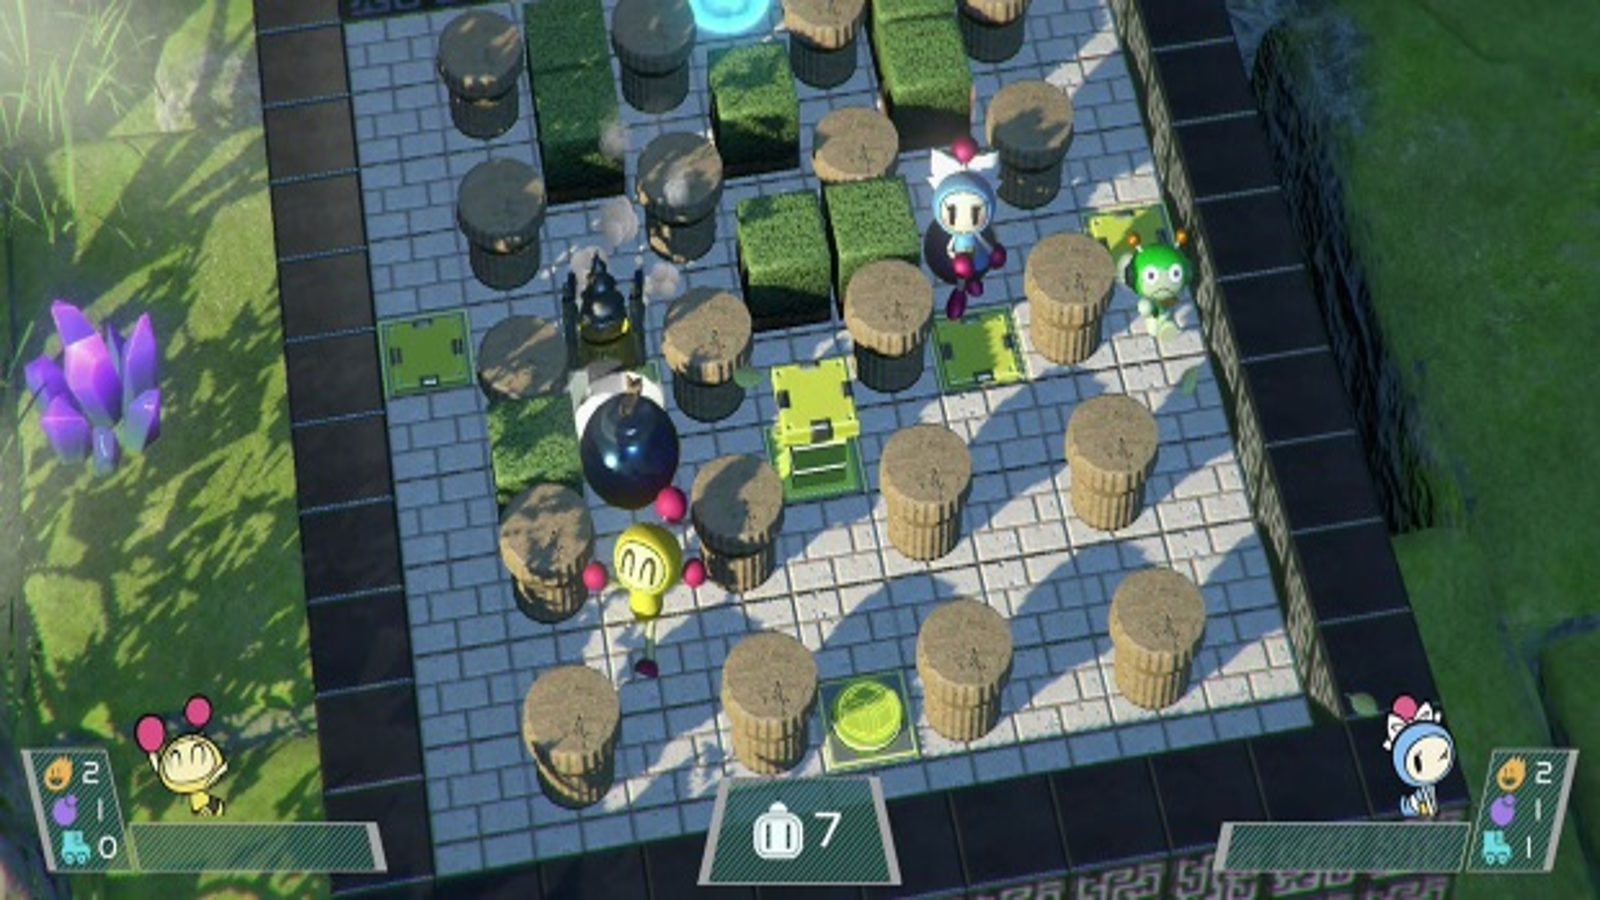 Super Bomberman R Receives Free Game Mode, Maps and Characters